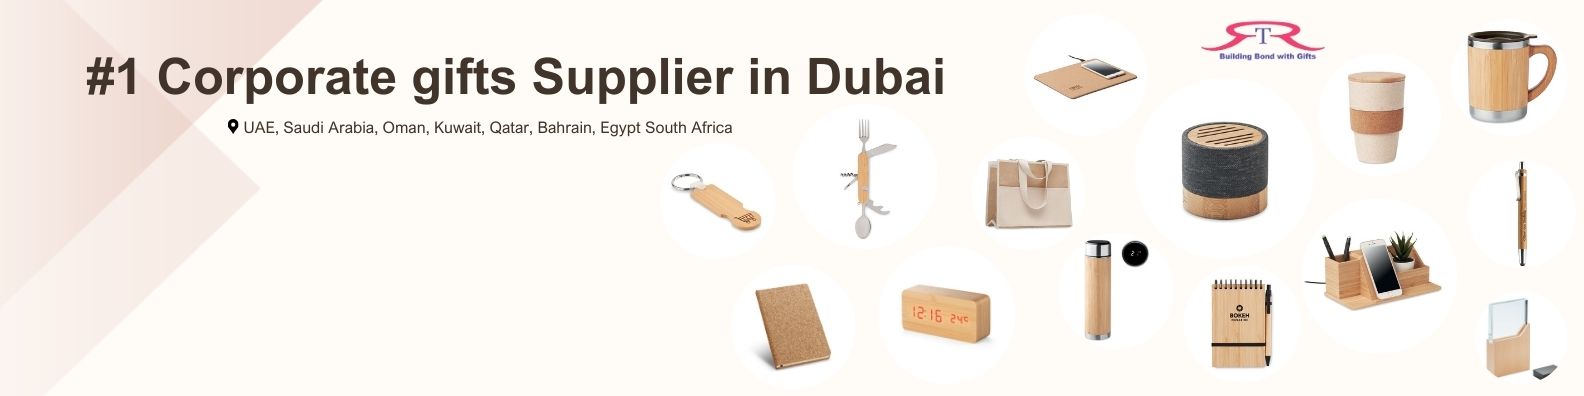 Gift Items Suppliers in Dubai, Gifts and Promotional Items in Dubai